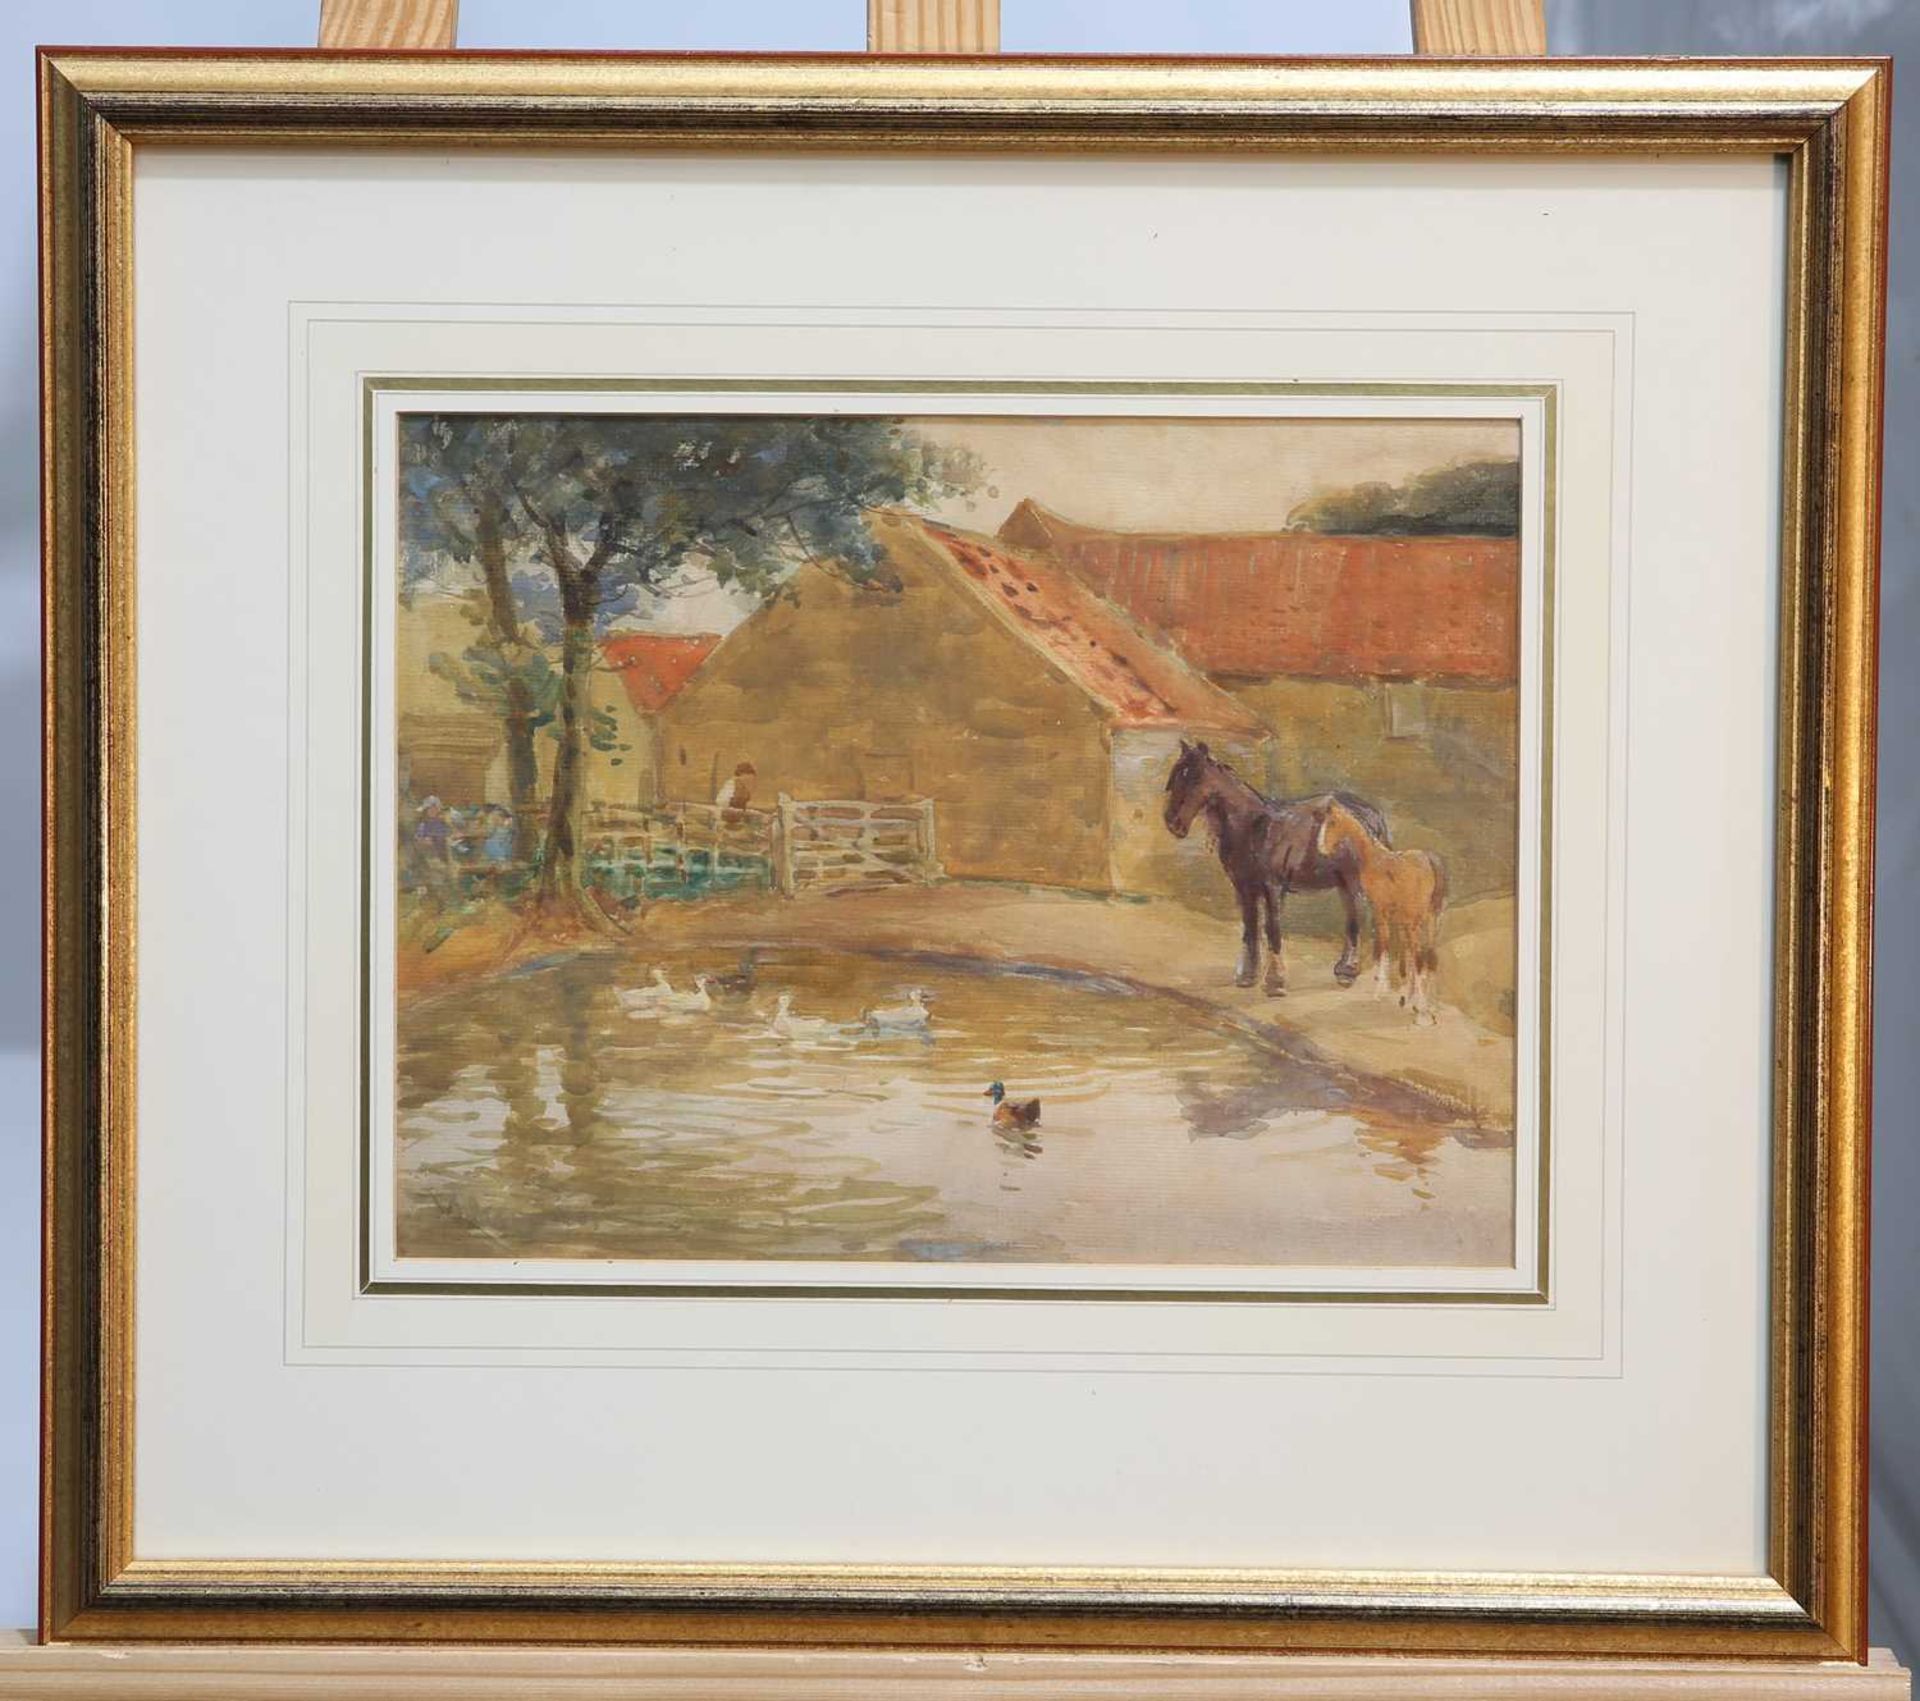 ENGLISH SCHOOL (LATE 19TH/EARLY 20TH CENTURY) SHIRE HORSE AND FOAL BESIDE A POND - Image 2 of 2